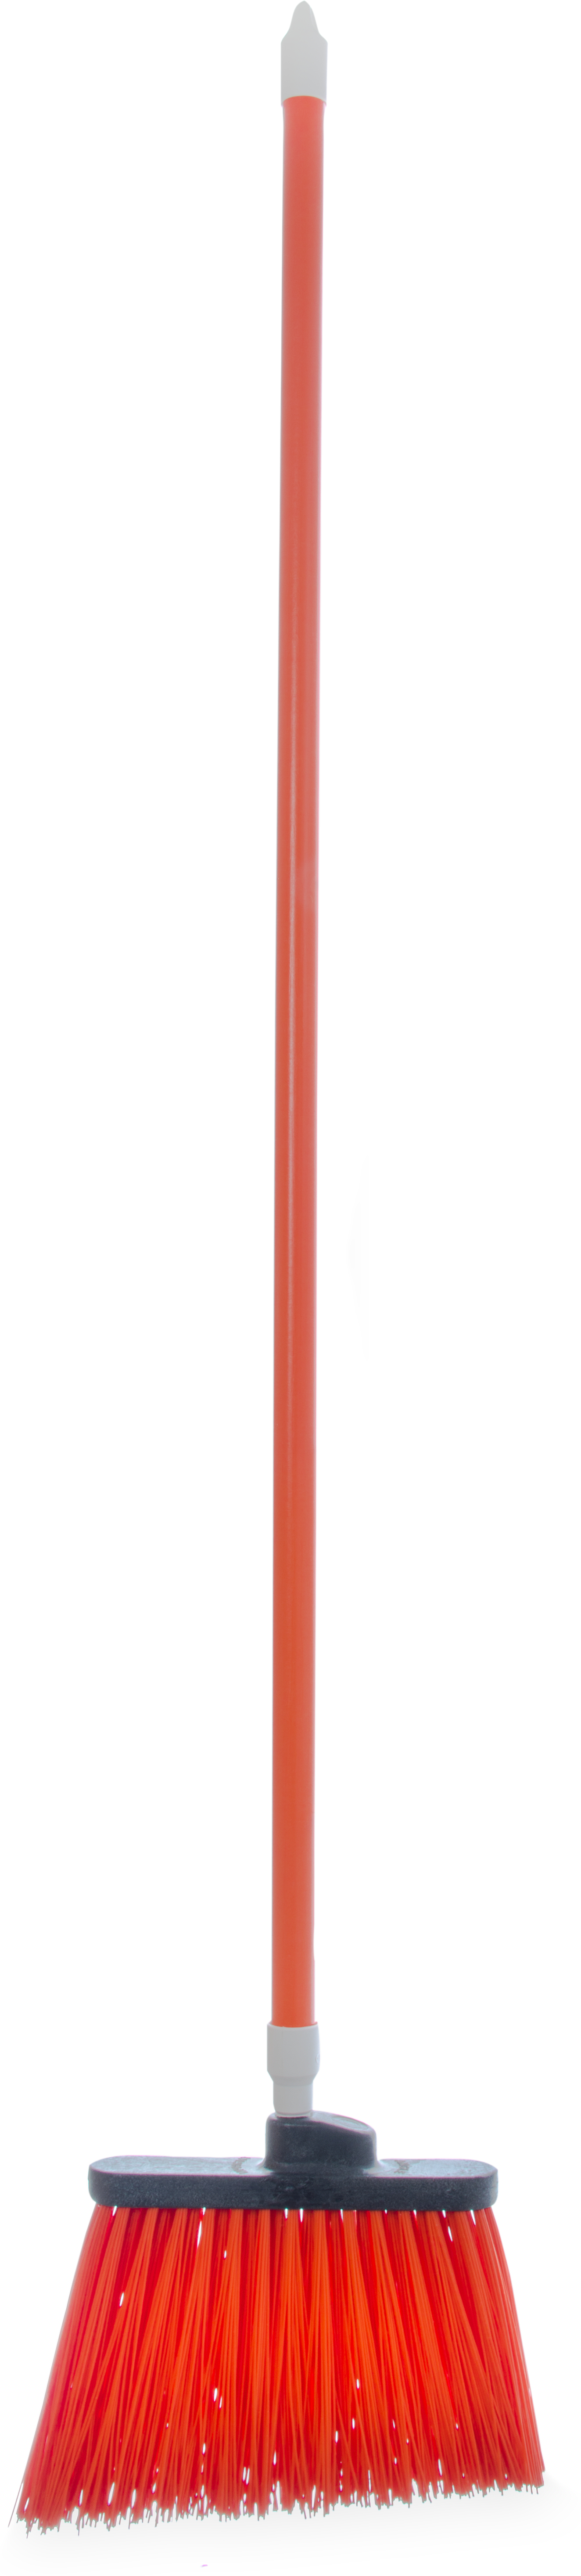 Sparta Spectrum Duo-Sweep Angle Broom Unflagged 56 Long - Orange